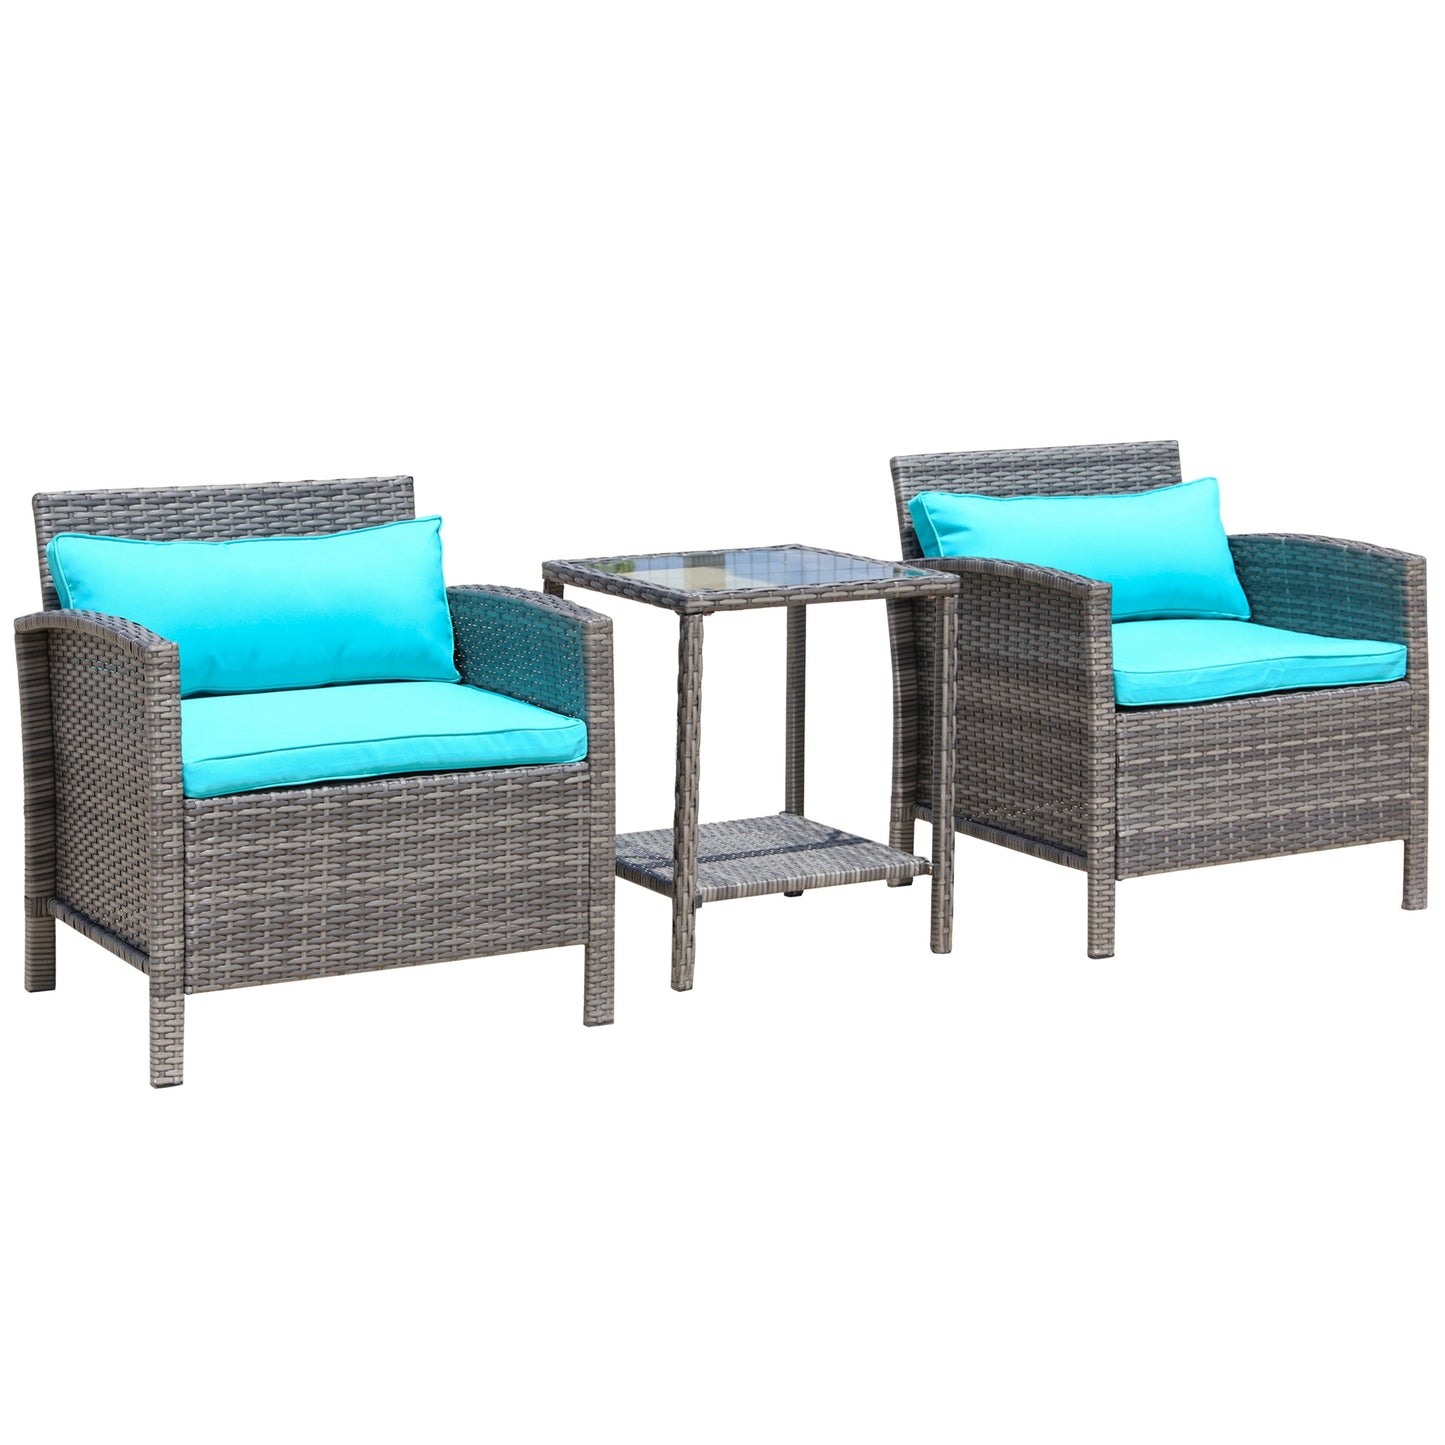 Outdoor and Garden-3 Pcs Rattan Wicker Bistro Set with Soft Cushions, Outdoor Coffee Sets with Glass Table and Open Storage Shelf for Patio, Green - Outdoor Style Company